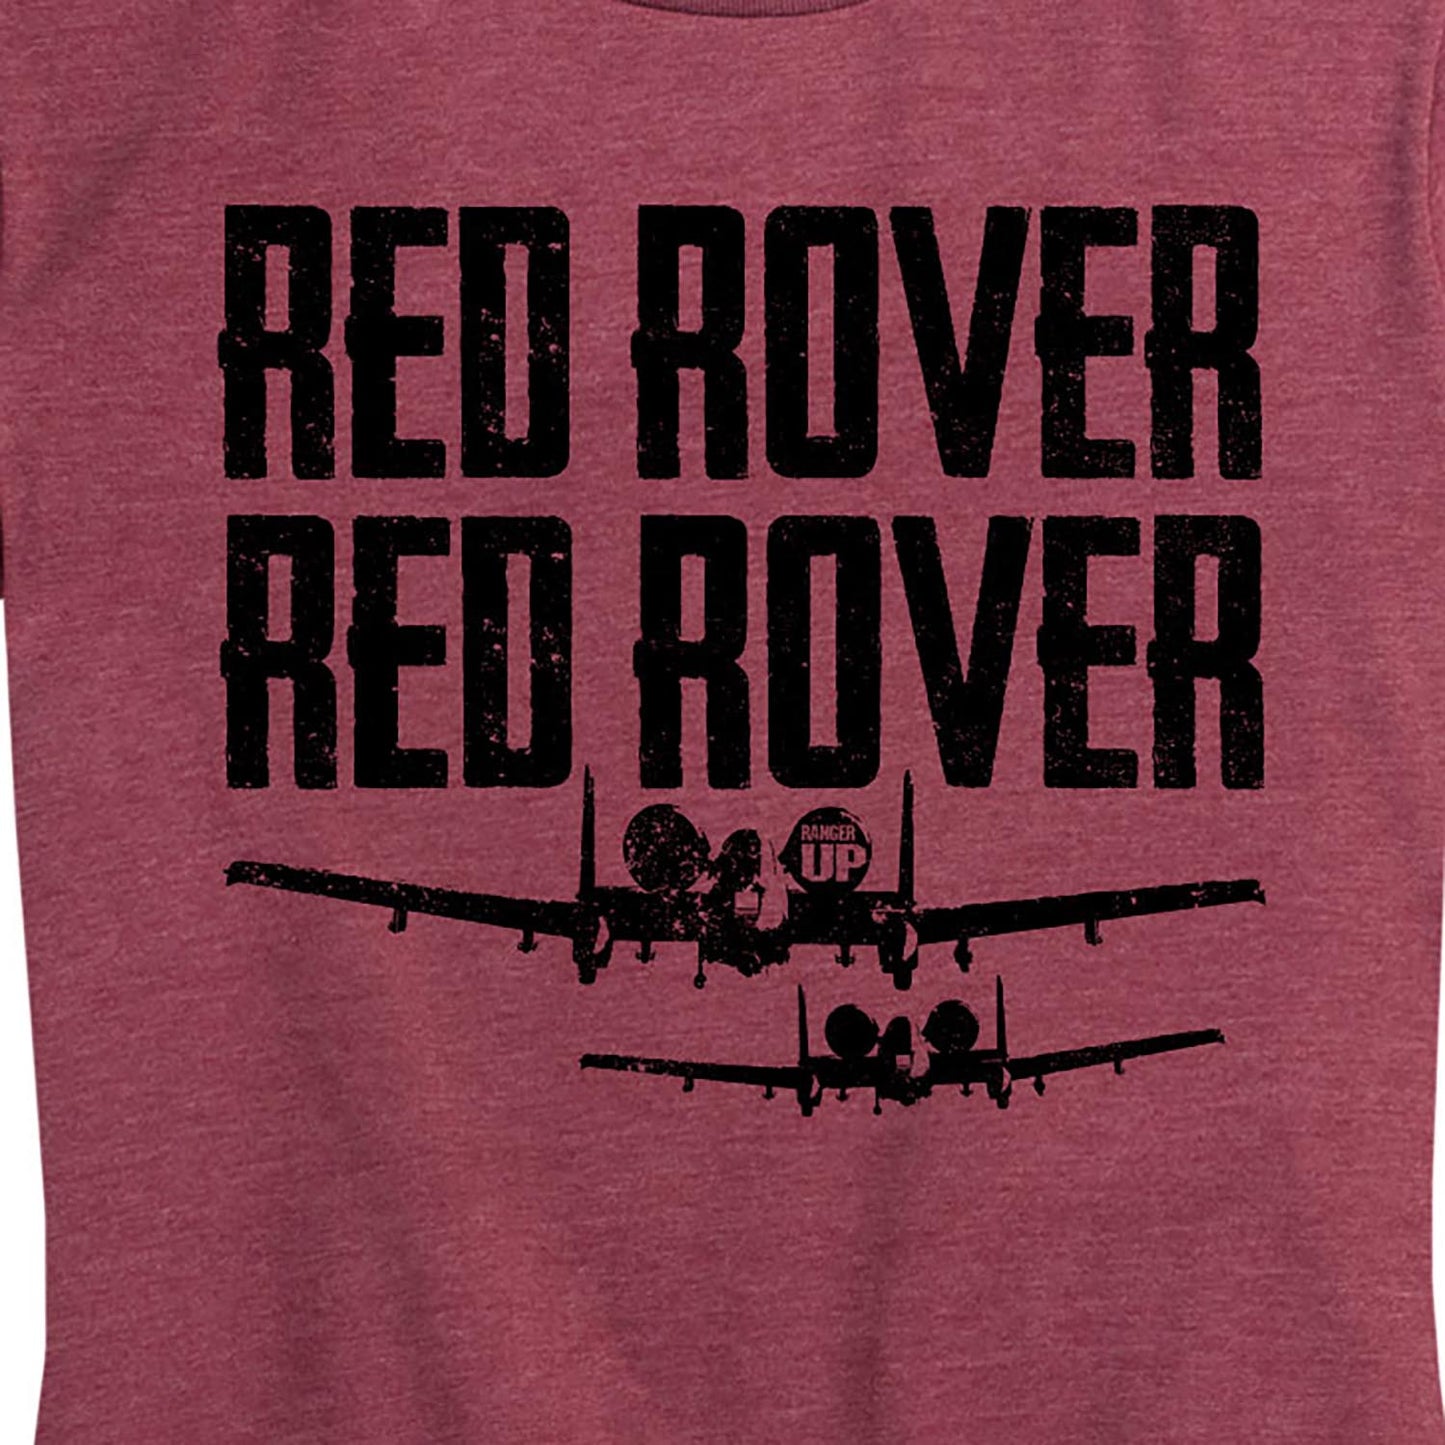 Women's Red Rover A-10 Tee